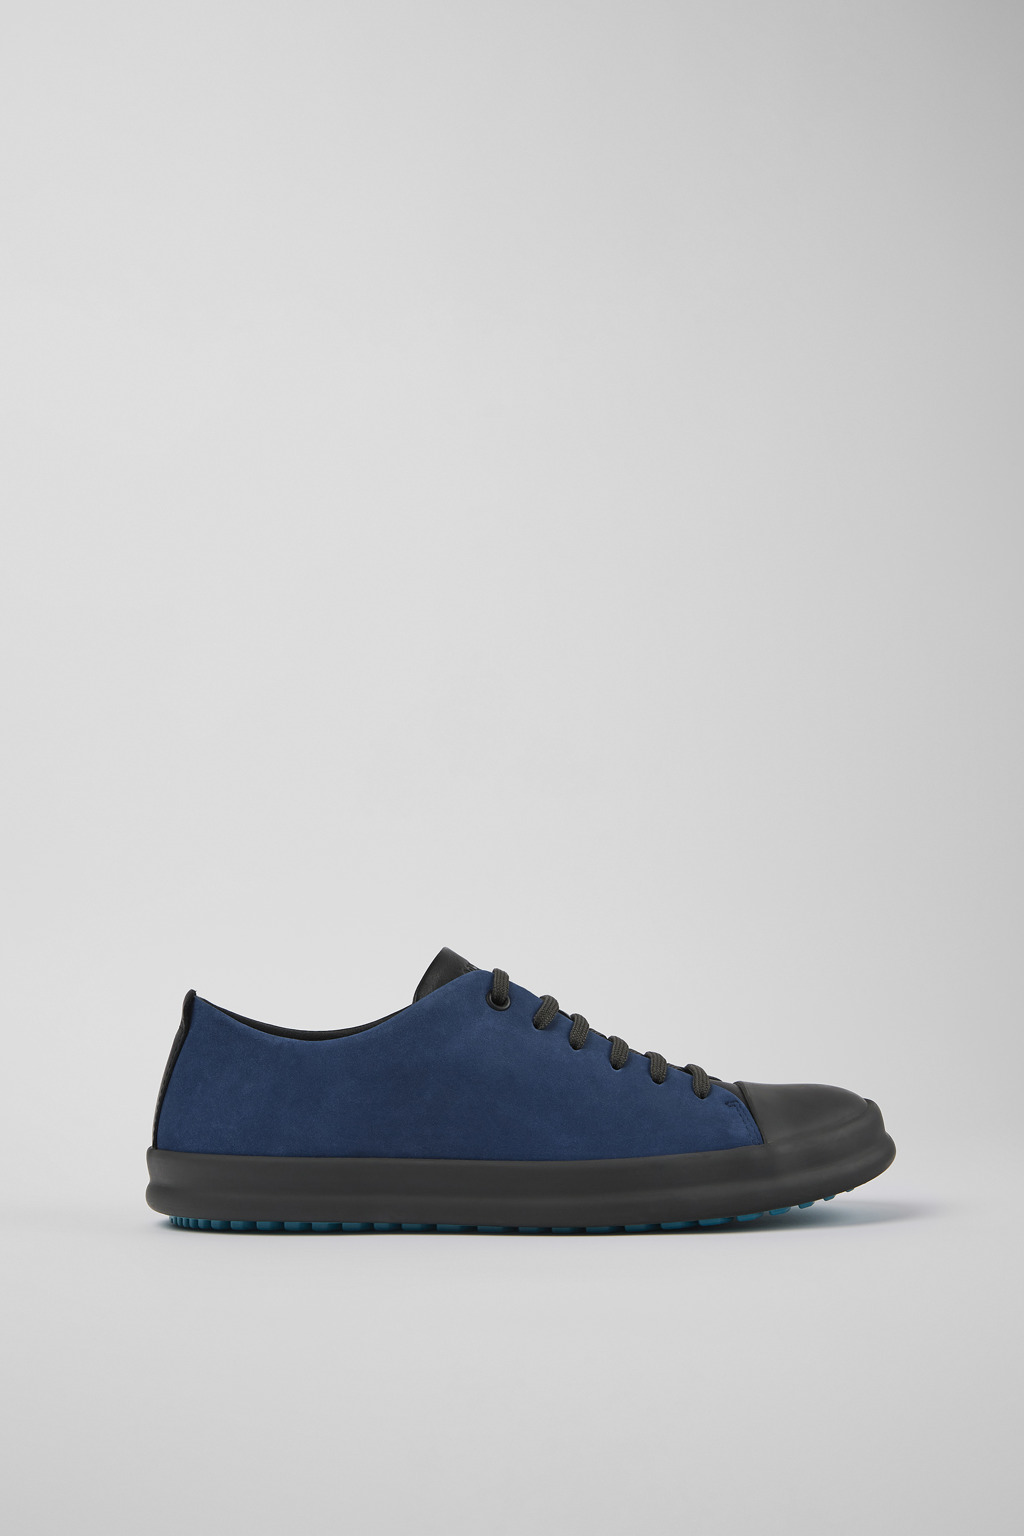 Twins Multicolor Lace-Up for Men - Fall/Winter collection - Camper 